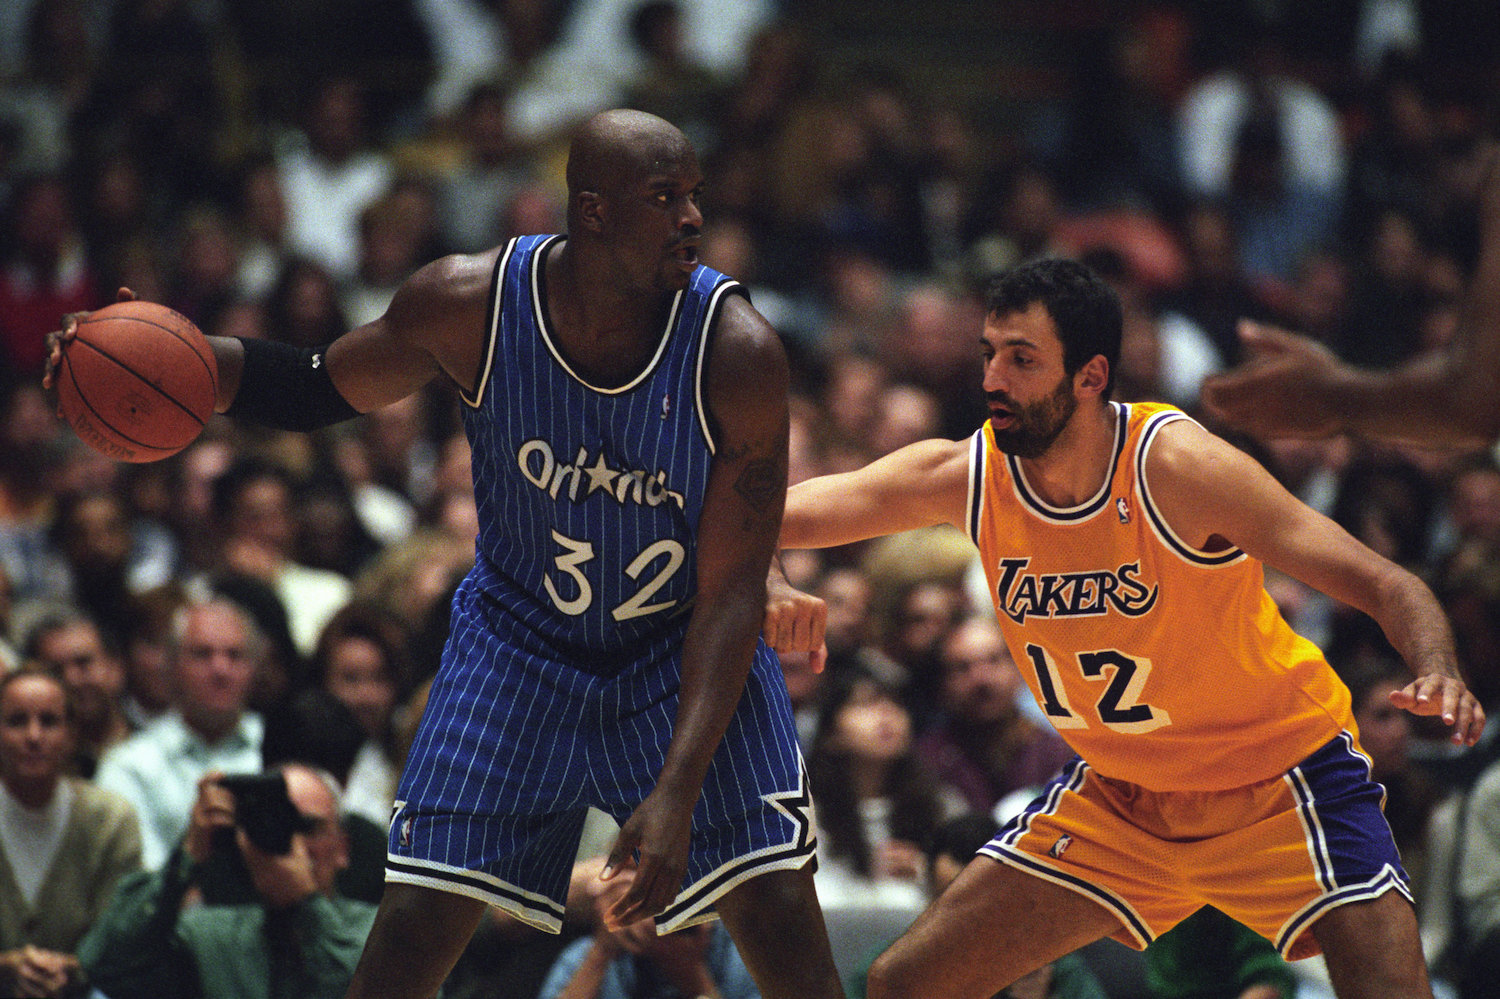 A young Shaquille O'Neal in action as a member of the Orlando Magic.